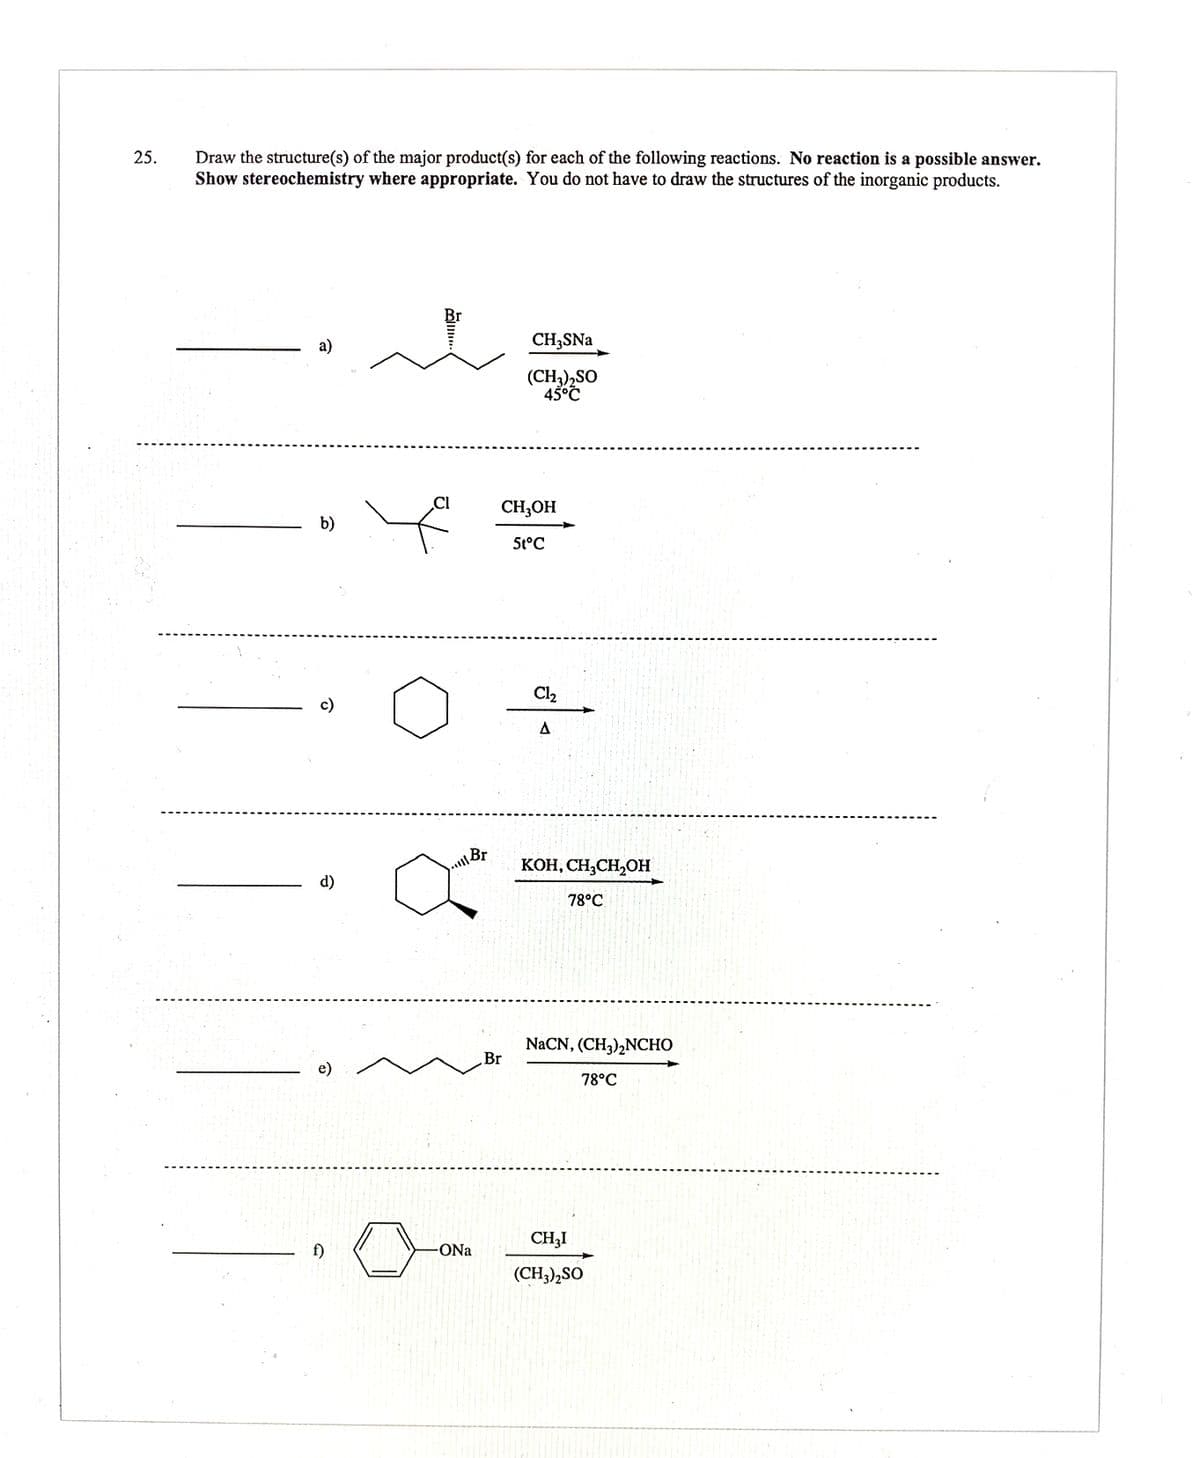 Draw the structure(s) of the major product(s) for each of the following reactions. No reaction is a possible answer.
Show stereochemistry where appropriate. You do not have to draw the structures of the inorganic products.
25.
a)
CH3SNA
(CH3),SO
45°Č
CH,OH
b)
5t°C
Cl2
c)
A
uBr
KOH, CH,CH,OH
d)
78°C
NaCN, (CH3),NCHO
Br
e)
78°C
CH3I
-ONa
(CH3),SO
